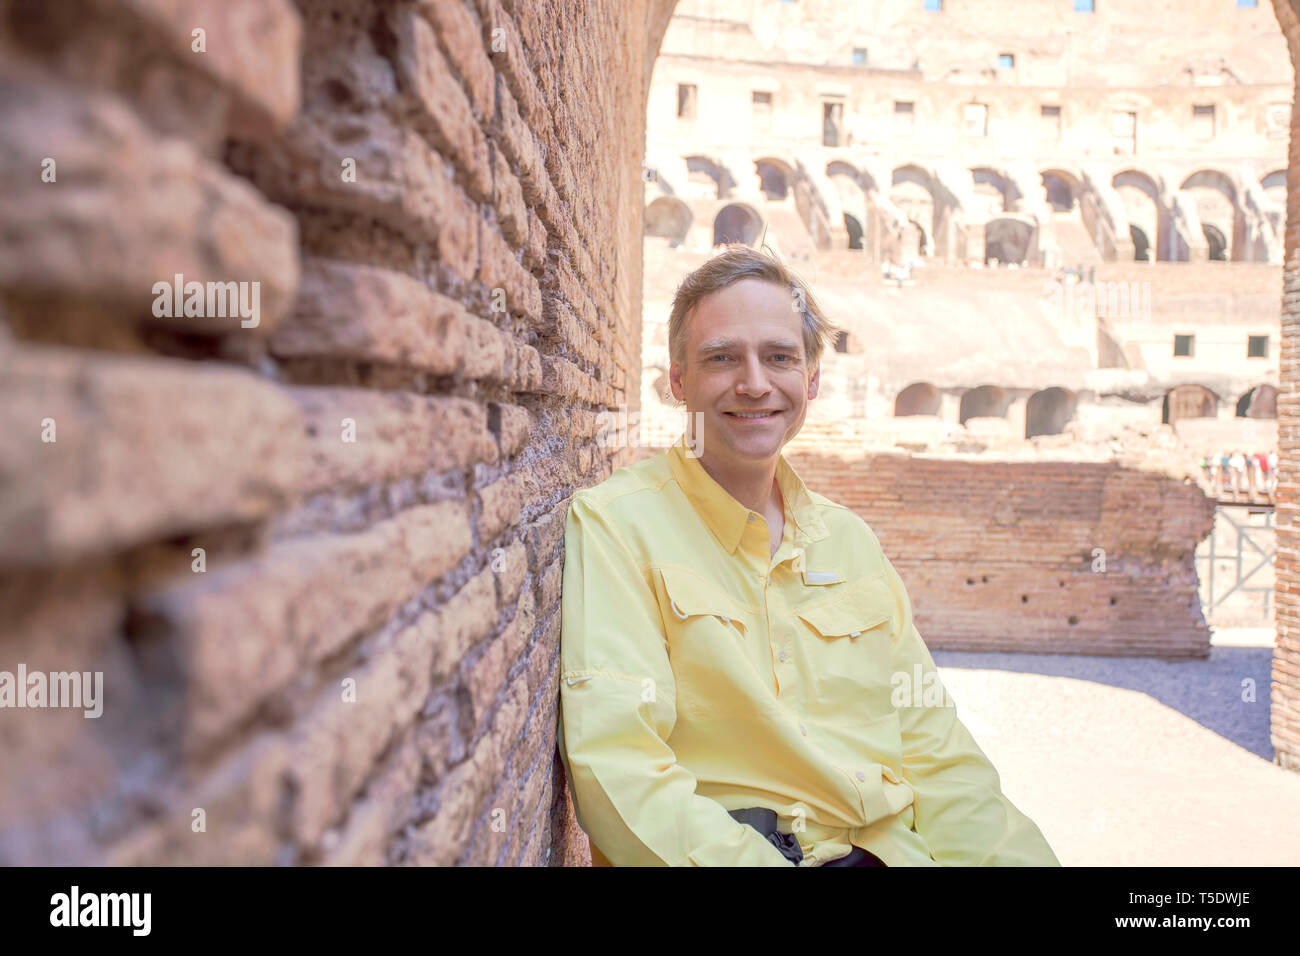 Smiling Caucasian man in yellow shirt, sitting and leaning against ancient brick wall  inside the Colloseum in Rome, Italy Stock Photo